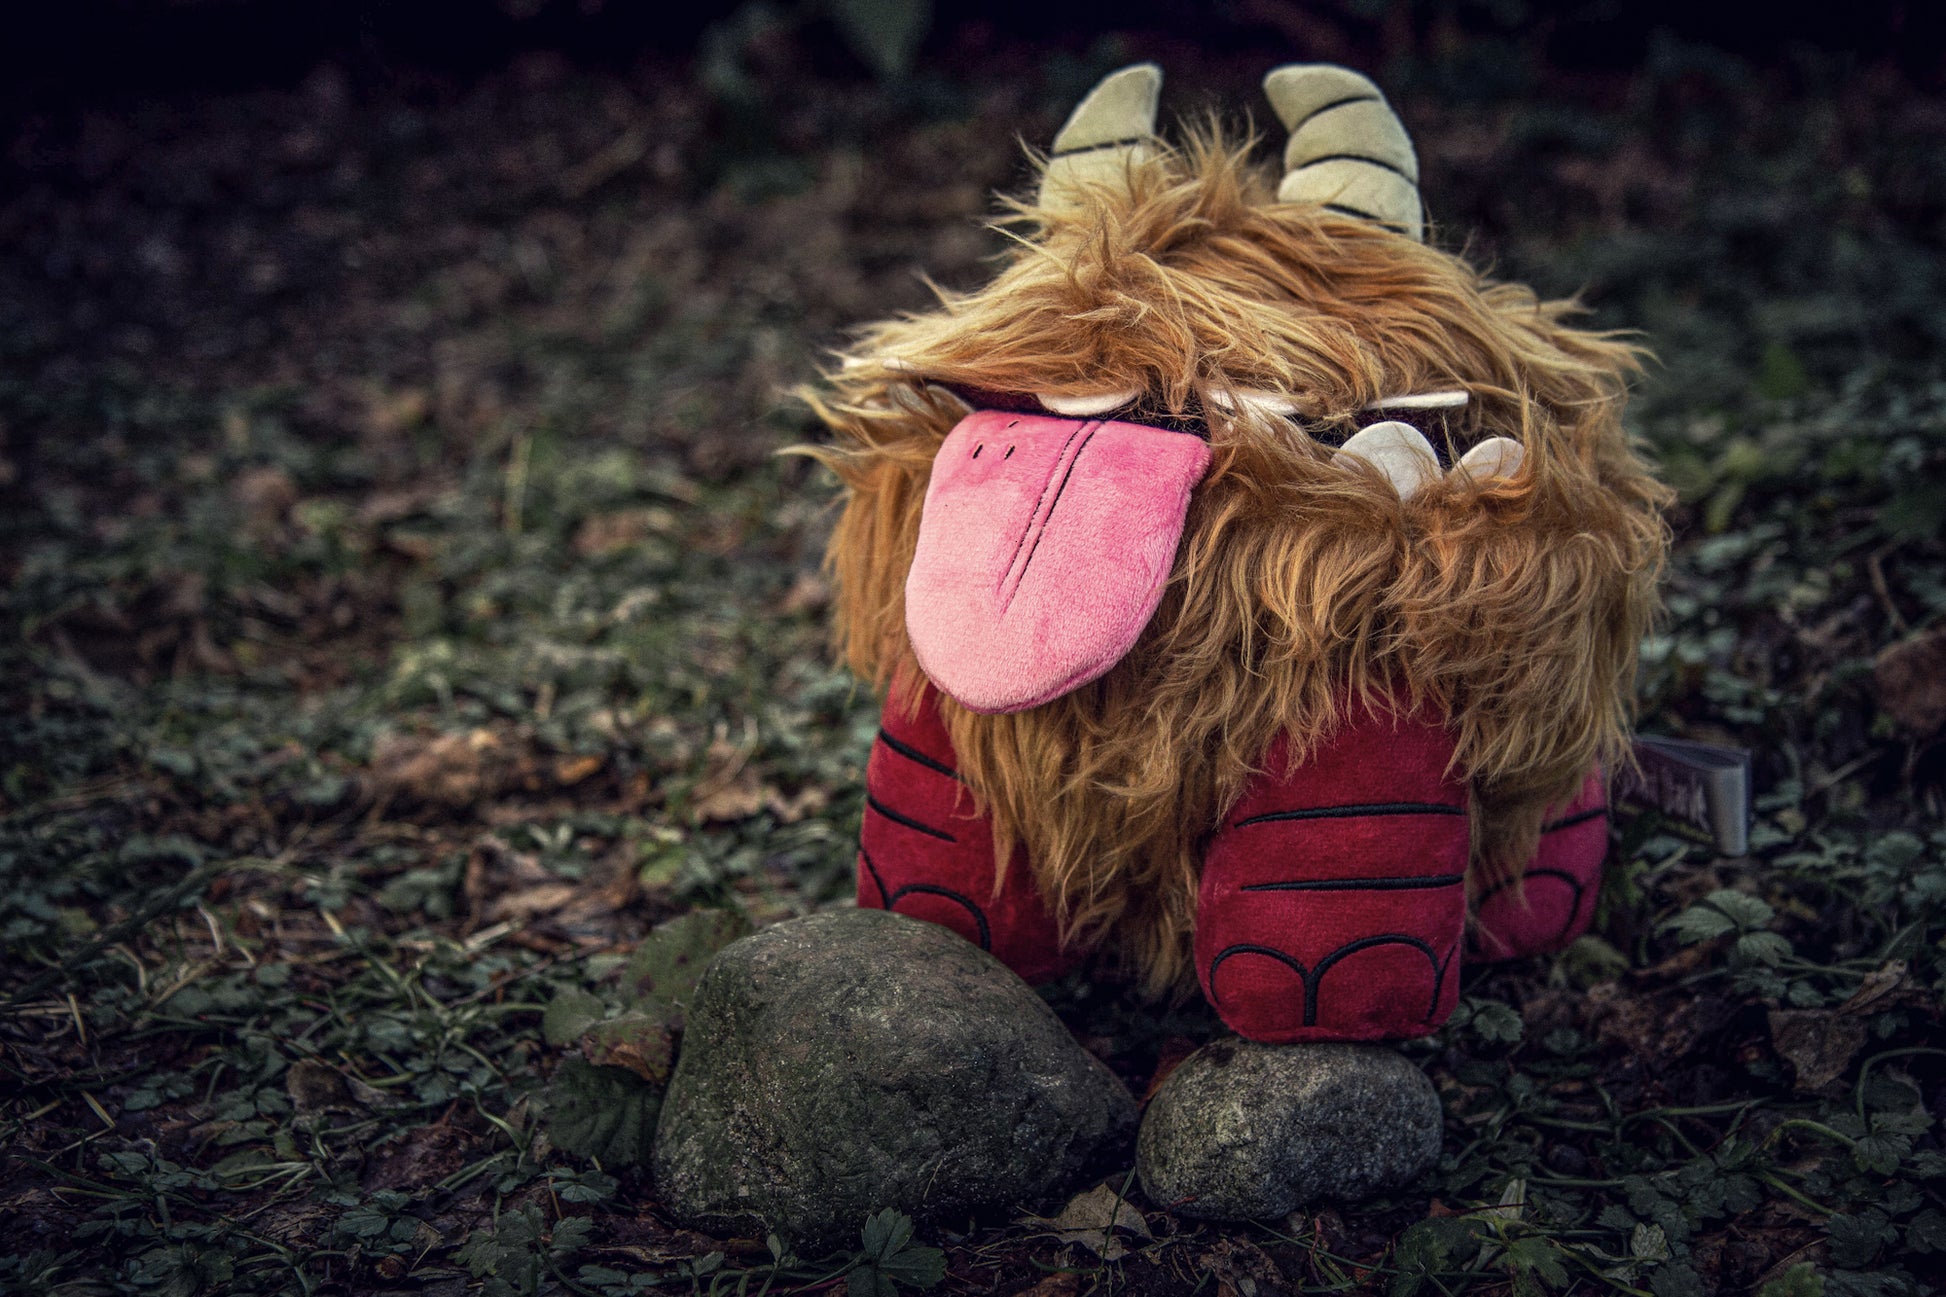 Chester Plush from Don't Starve